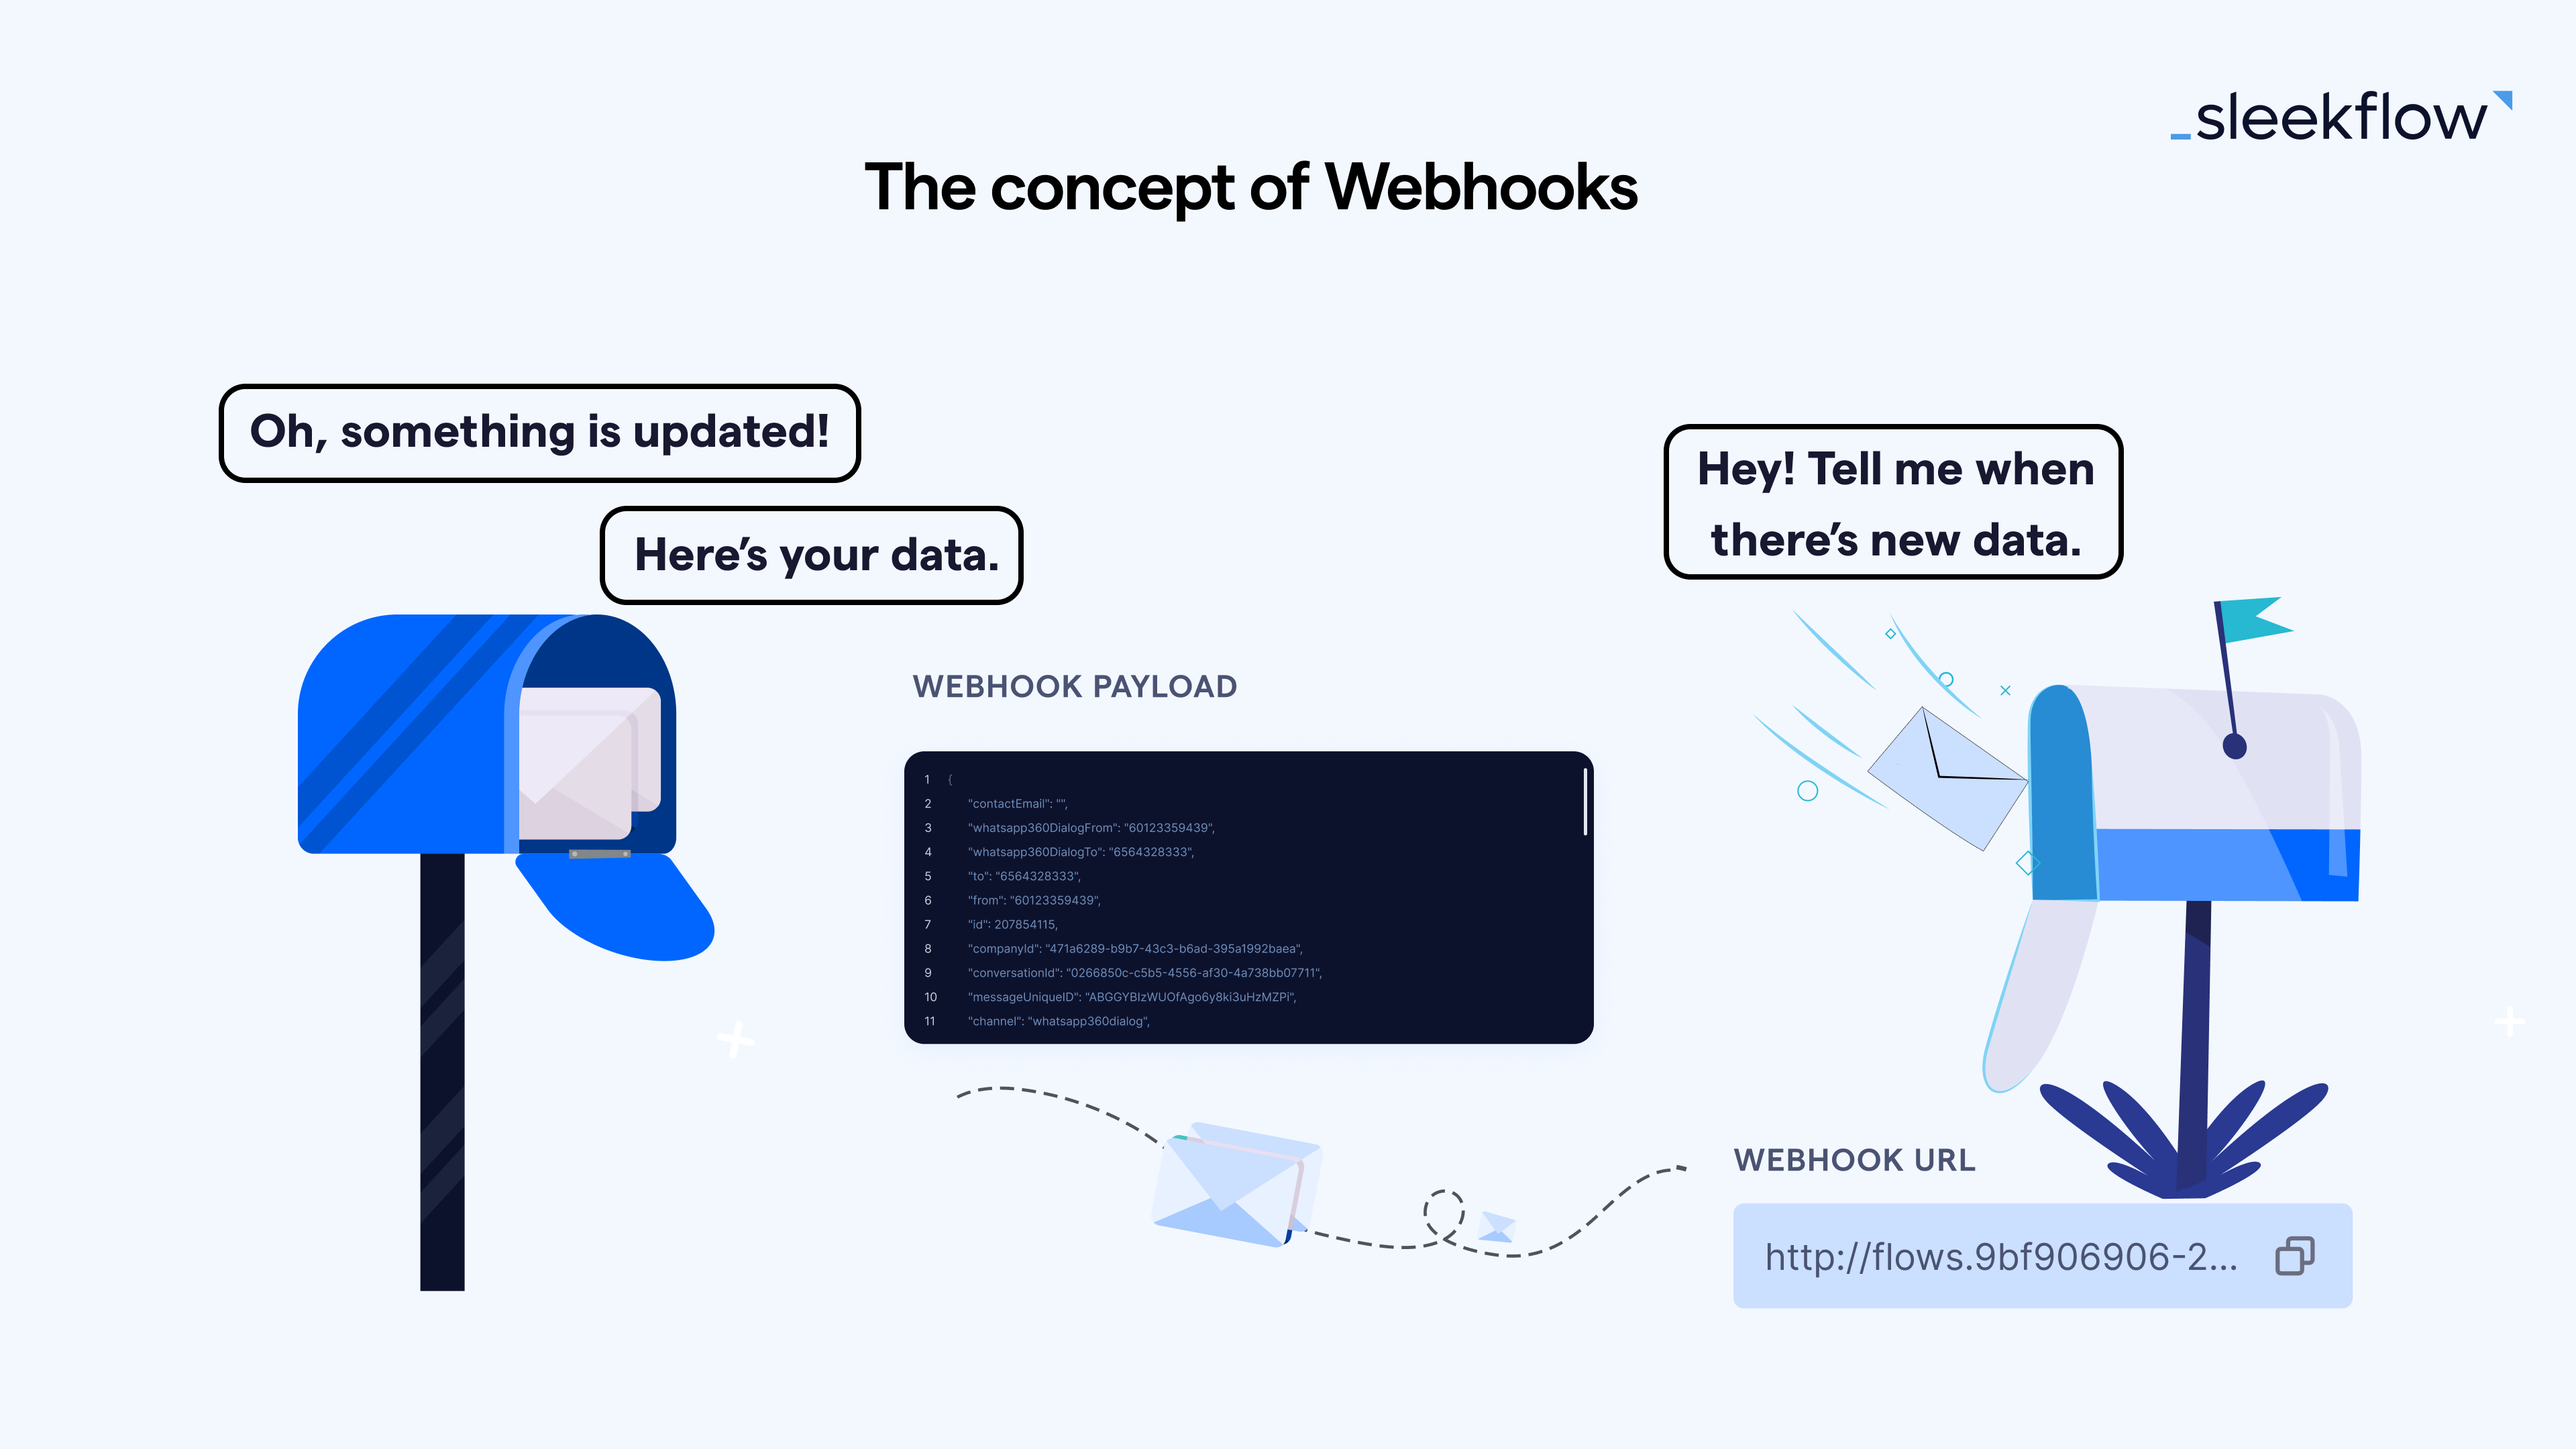 The concept of Webhook